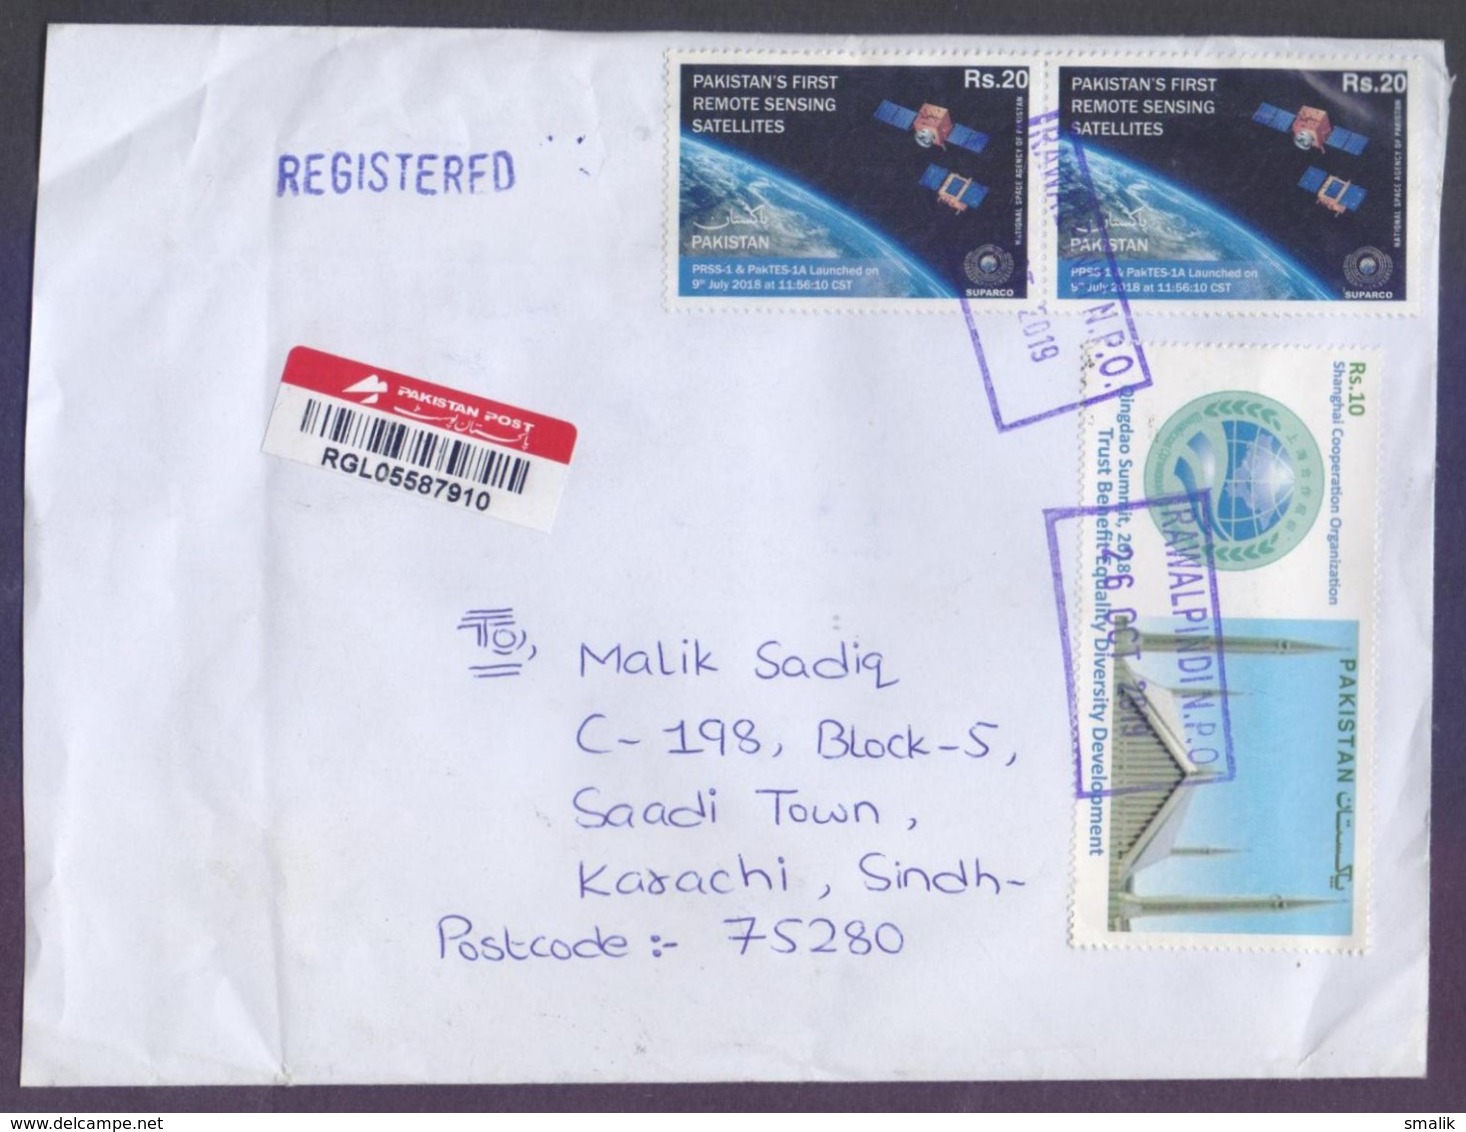 SPACE First Remote Satellites, Qingdao Summit At Shanghai China, Faisal Mosque, Postal History Cover From PAKISTAN, 2019 - Pakistán